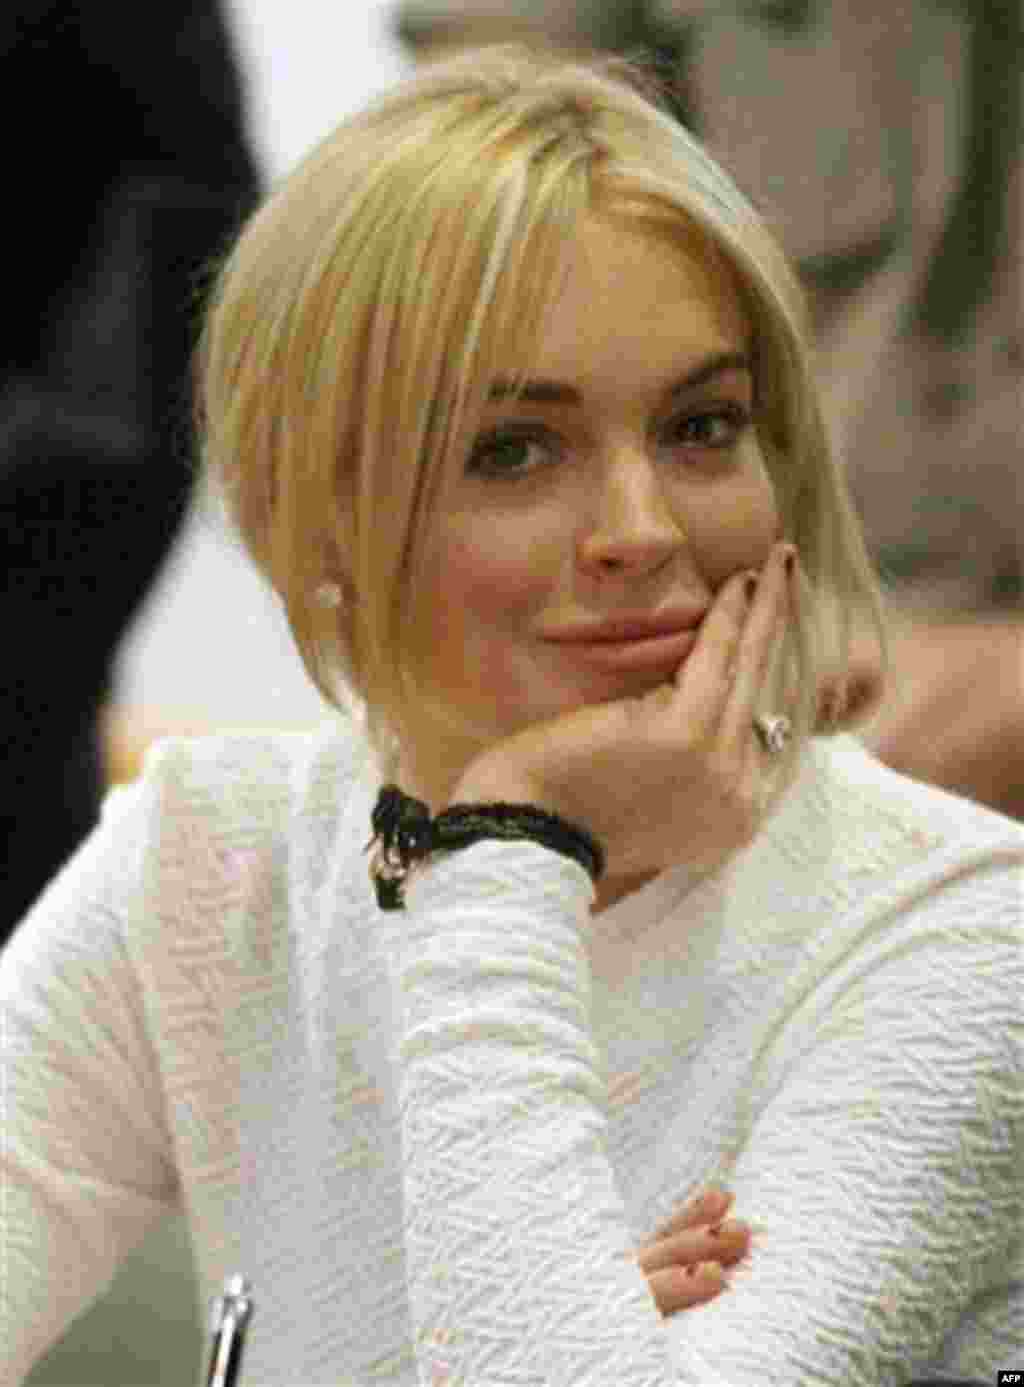 FILE - In this Feb. 9, 2011 file photo, actress Lindsay Lohan appears in court during her arraignment on a felony grand theft charge at the LAX Airport Courthouse in Los Angeles. (AP Photo/Mario Anzuoni, file)